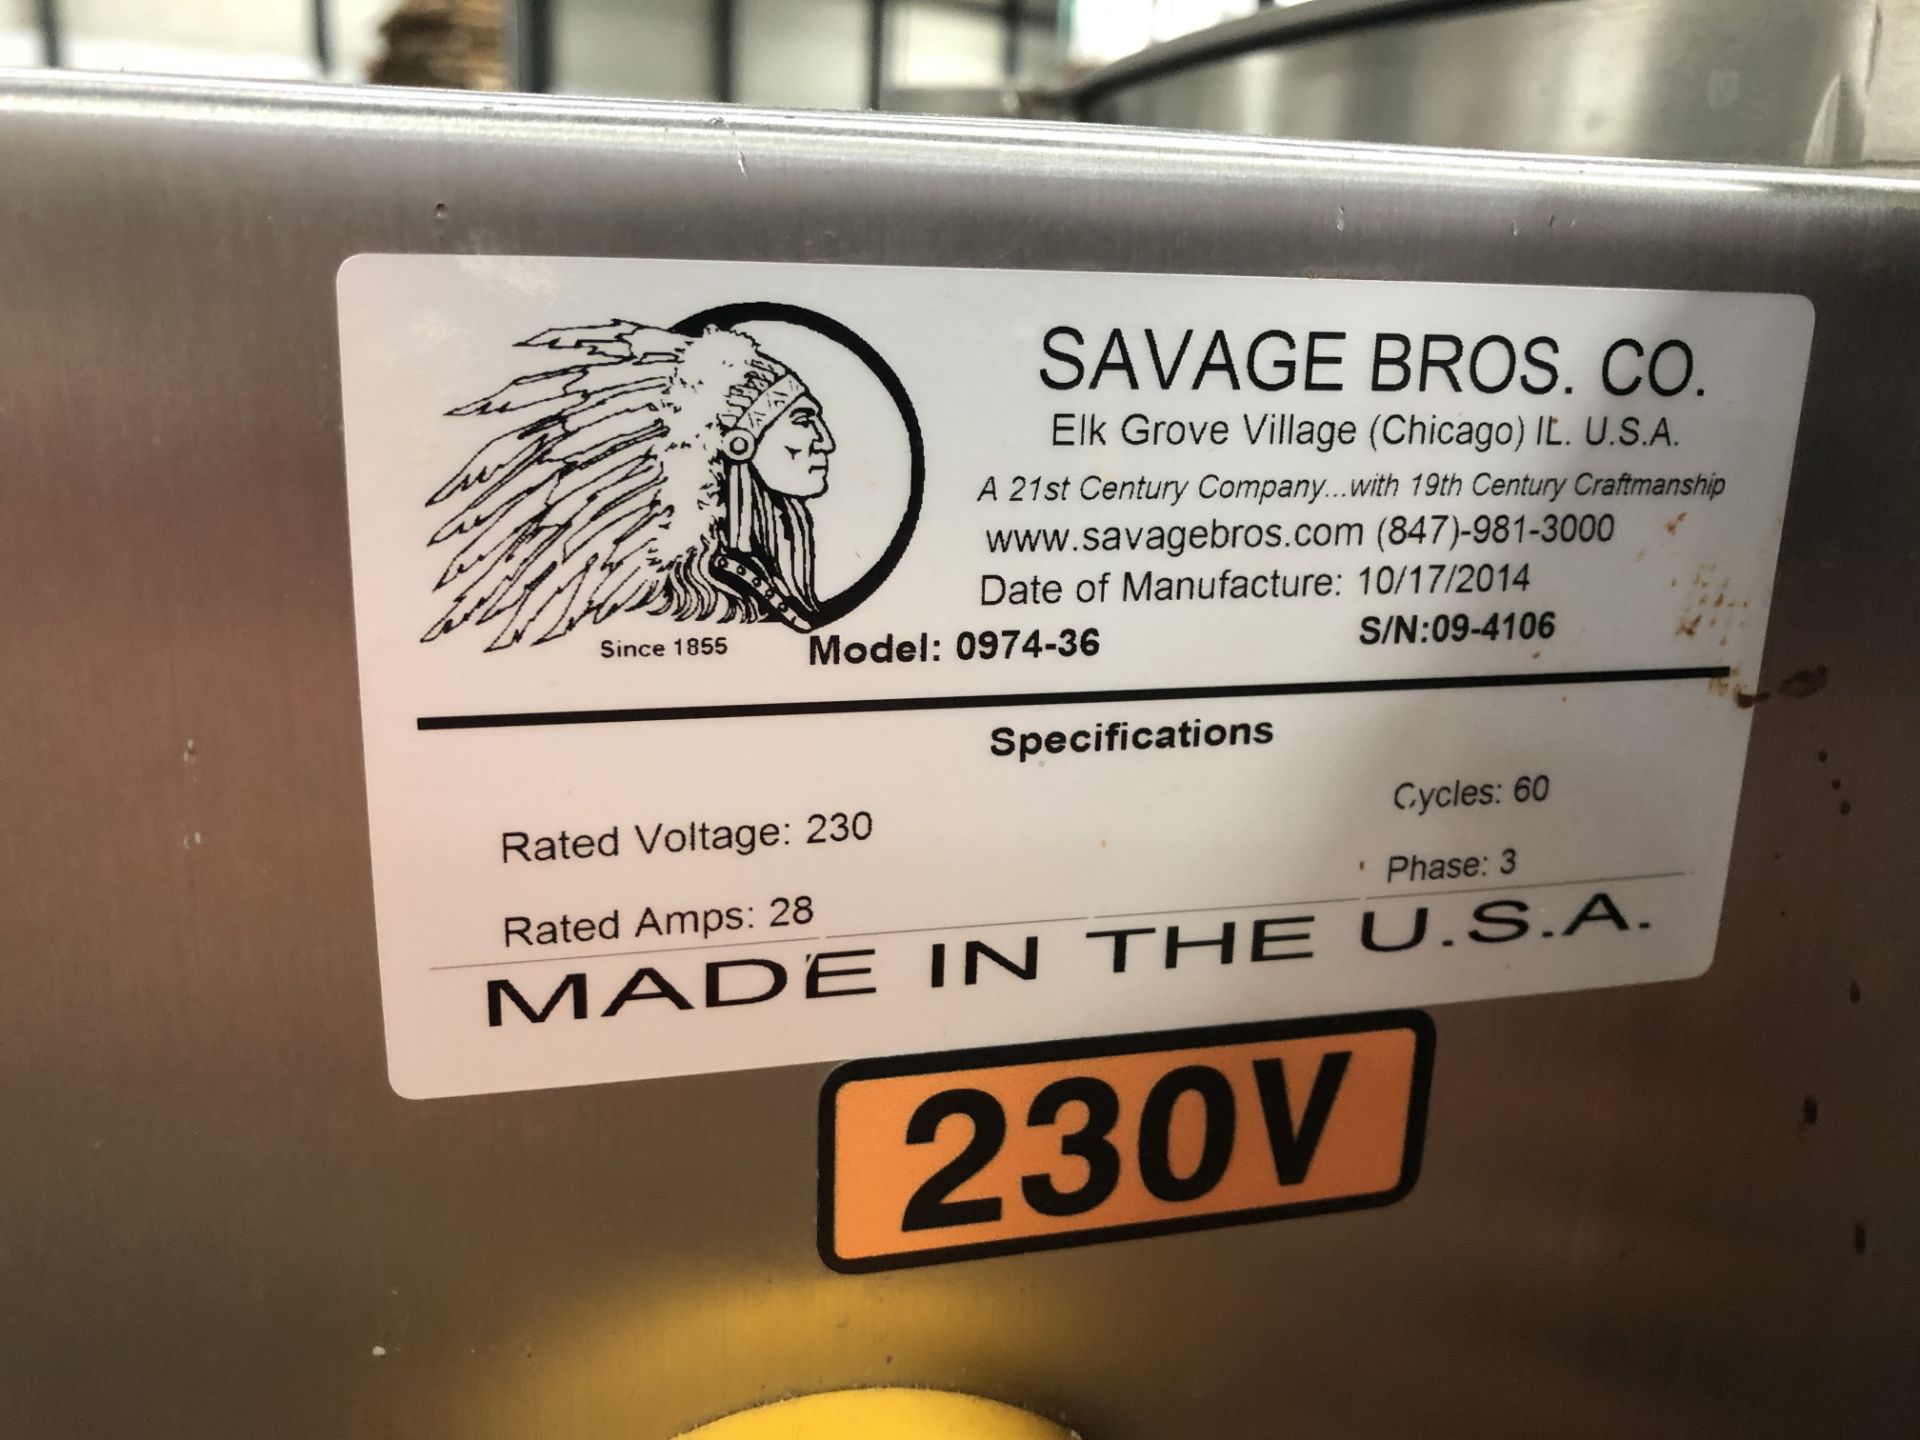 Savage Stainless Steel 1250-lb Chocolate Melter, model 0974-36, with PLC touchscreen - Image 2 of 6